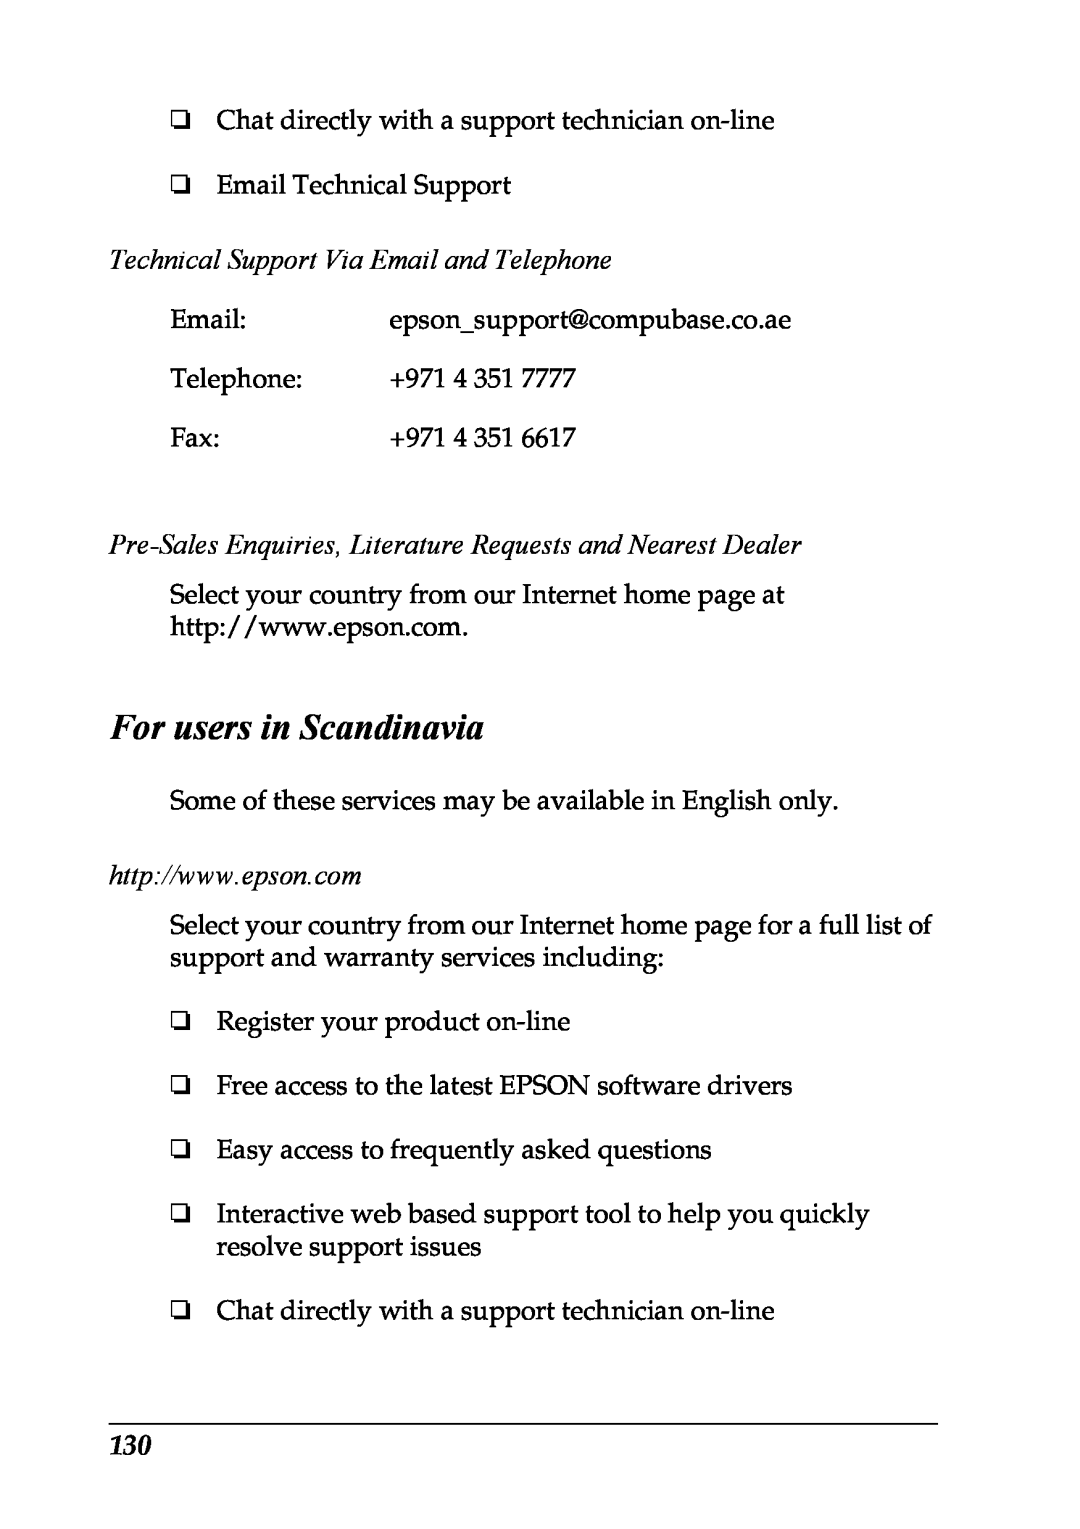 Epson LX-1170 manual For users in Scandinavia, Technical Support Via Email and Telephone 